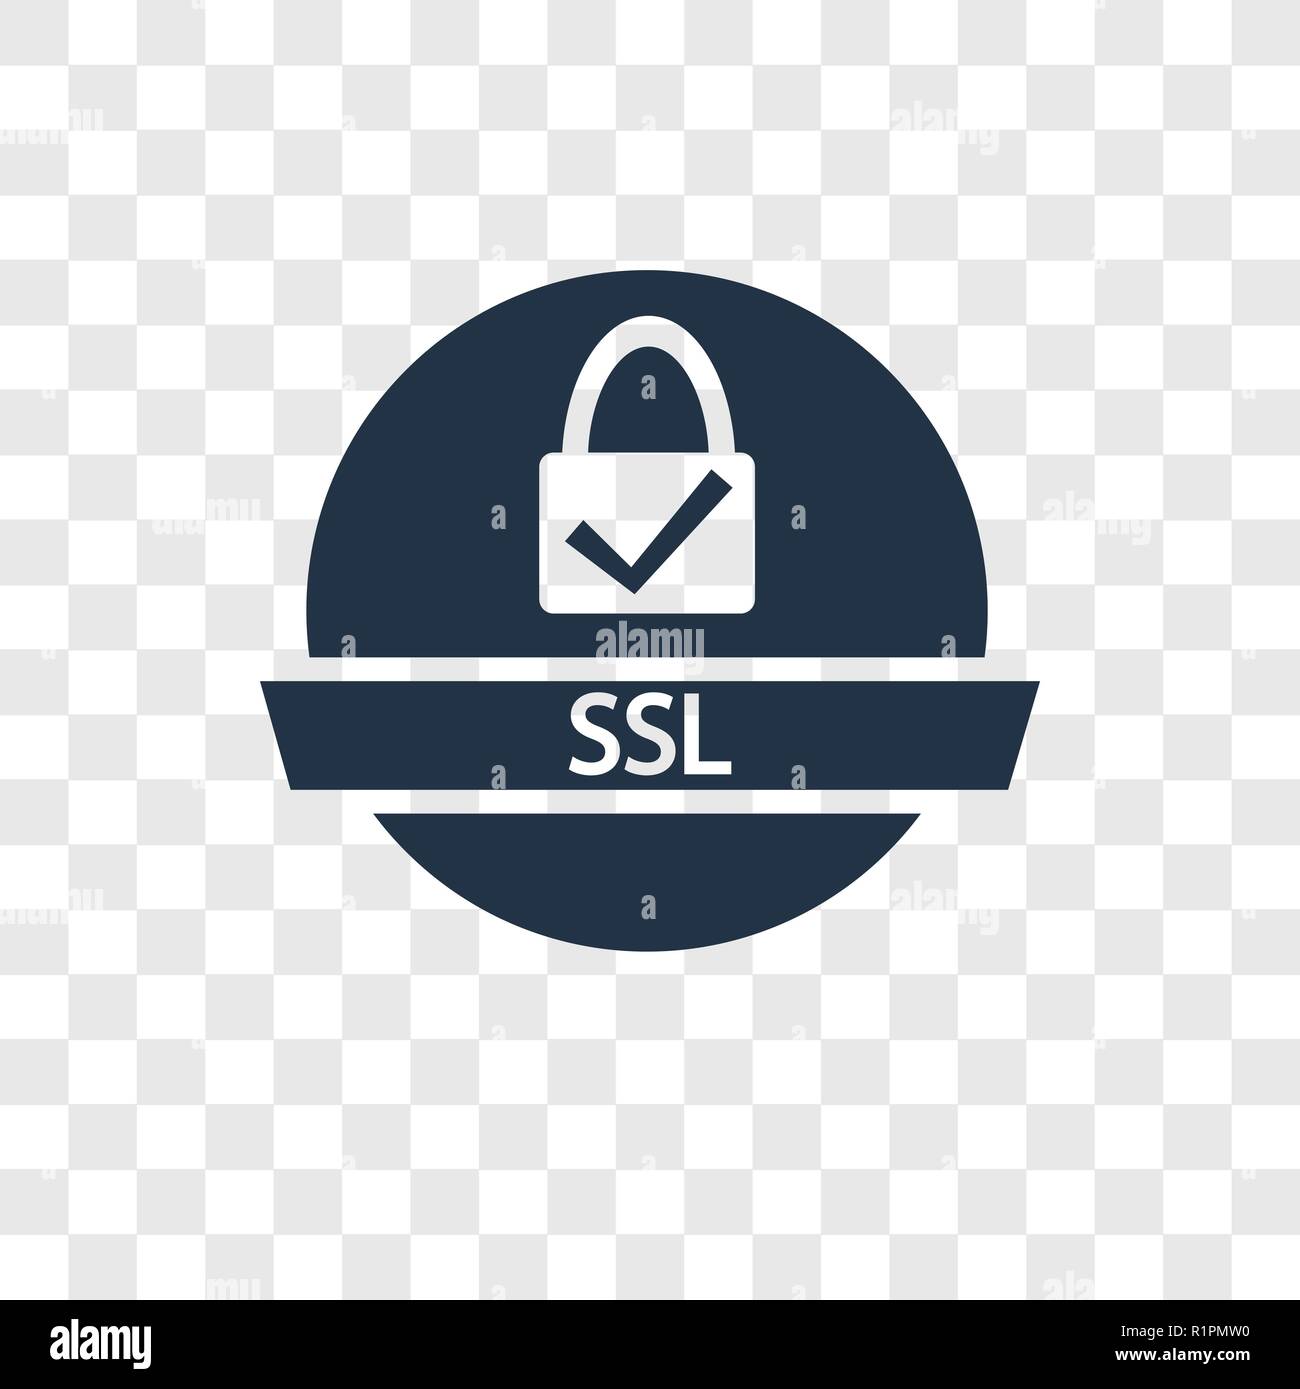 Ssl vector icon isolated on transparent background, Ssl transparency logo concept Stock Vector